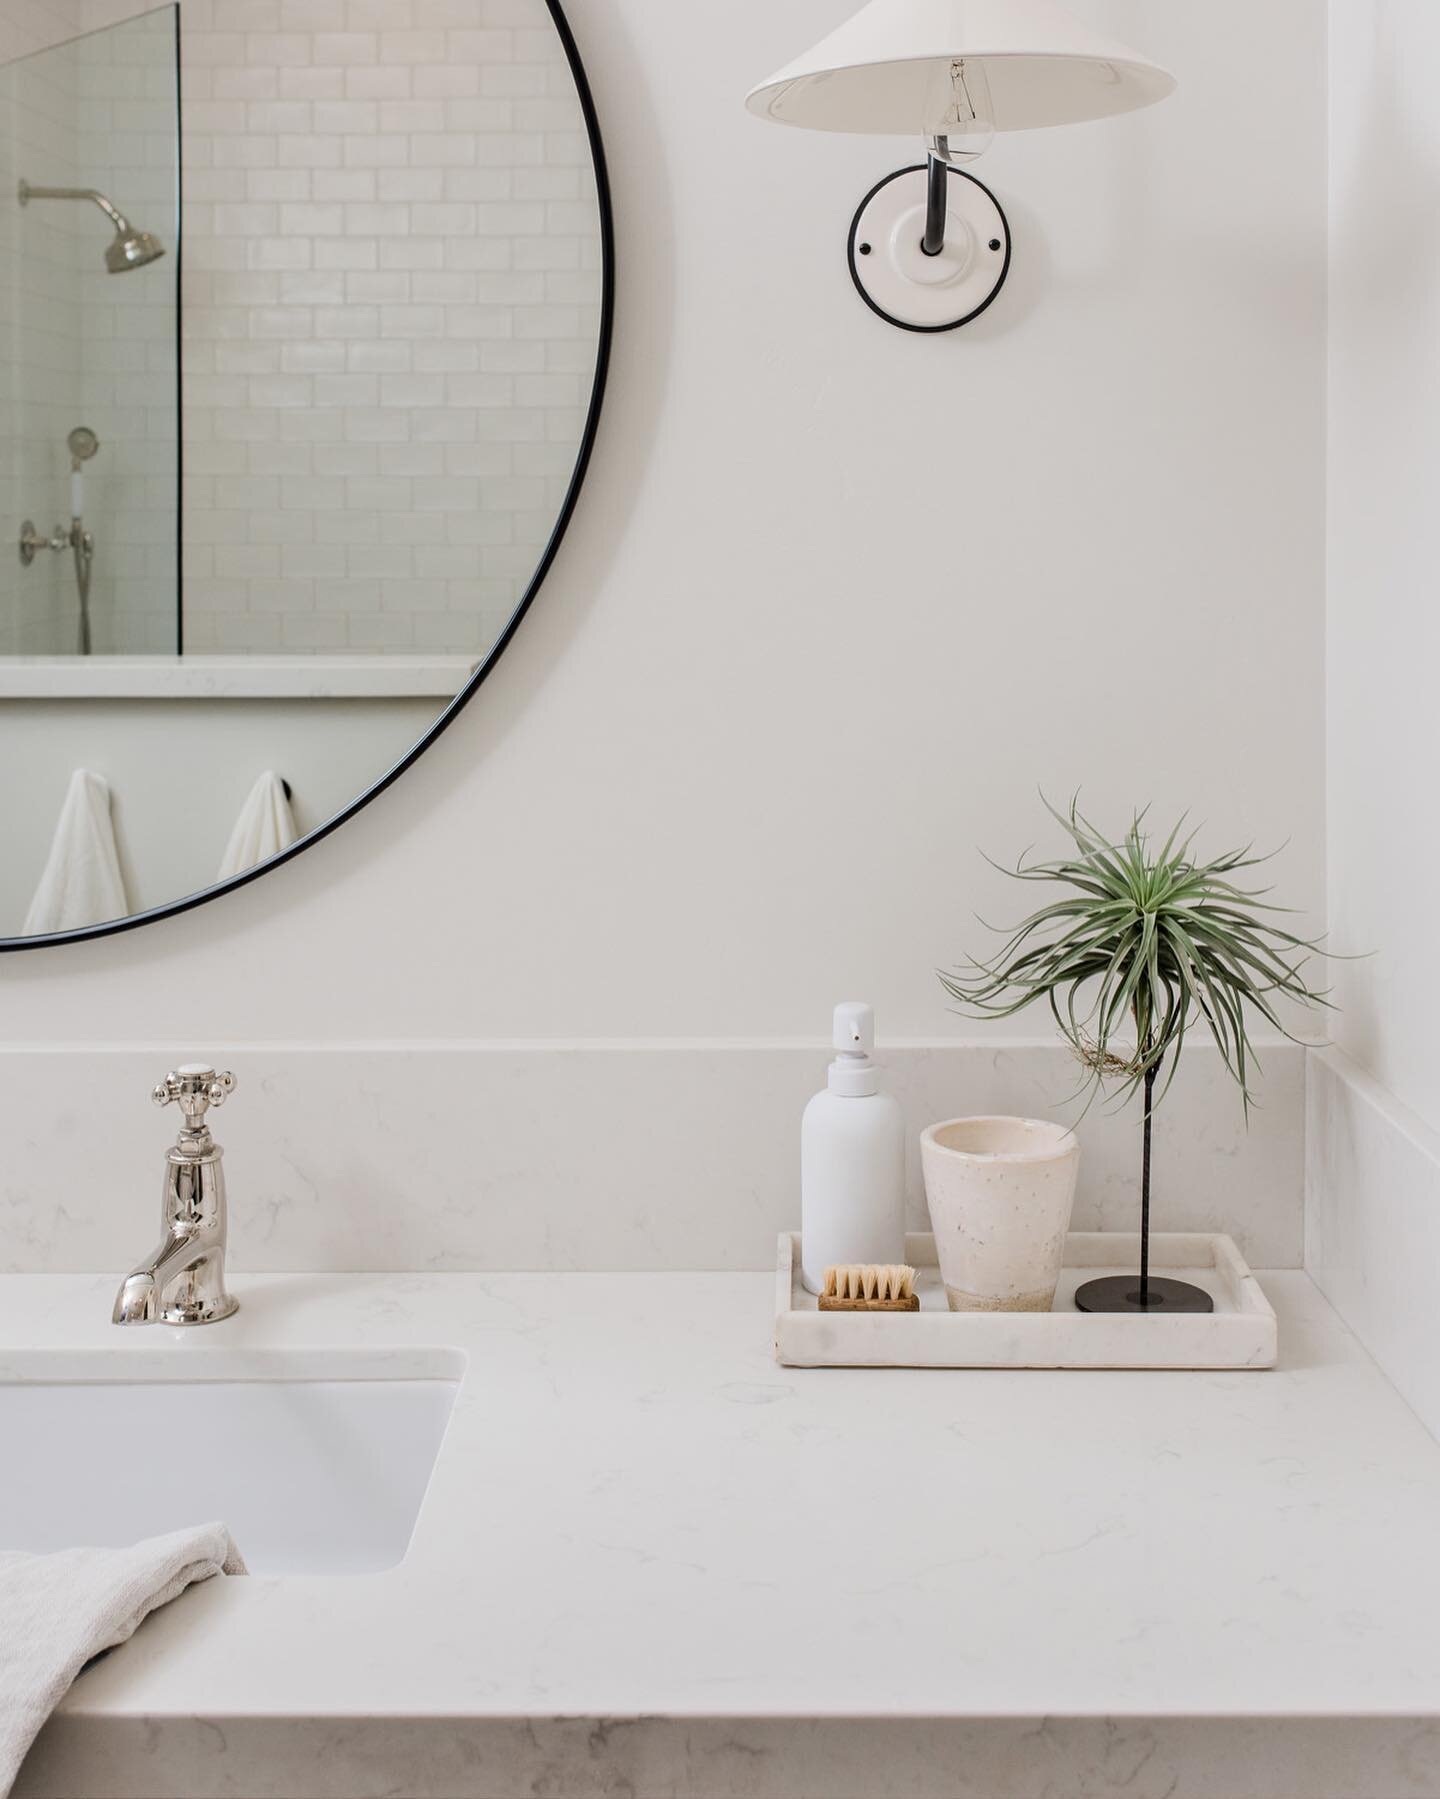 White on white on white on white! It just says CLEAN in a bathroom. And we say yes please. ⠀
⠀
Photographer: @rebeccagosselinphotography ⠀
#FletcherRhodes #FRstyle #InteriorDesign #WineCountryStyle #SonomaFamilyHome